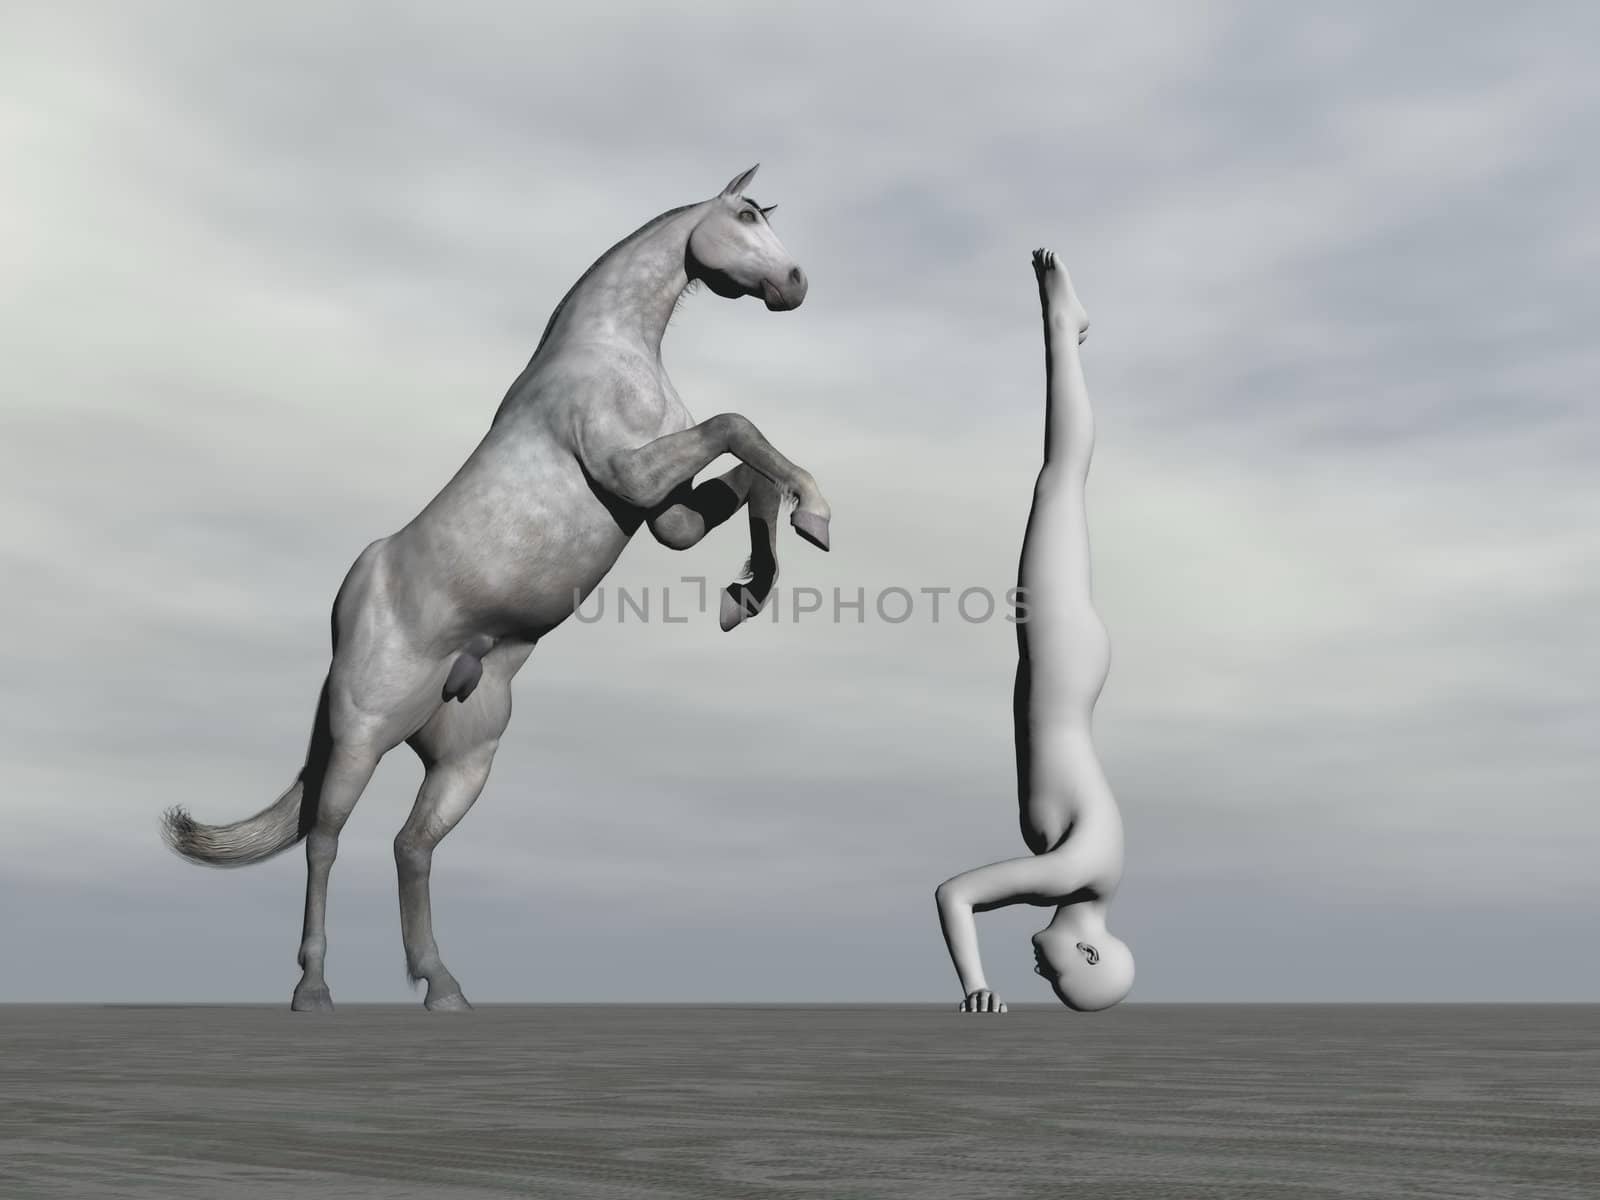 Human practicing yoga in front of rearing horse in grey background